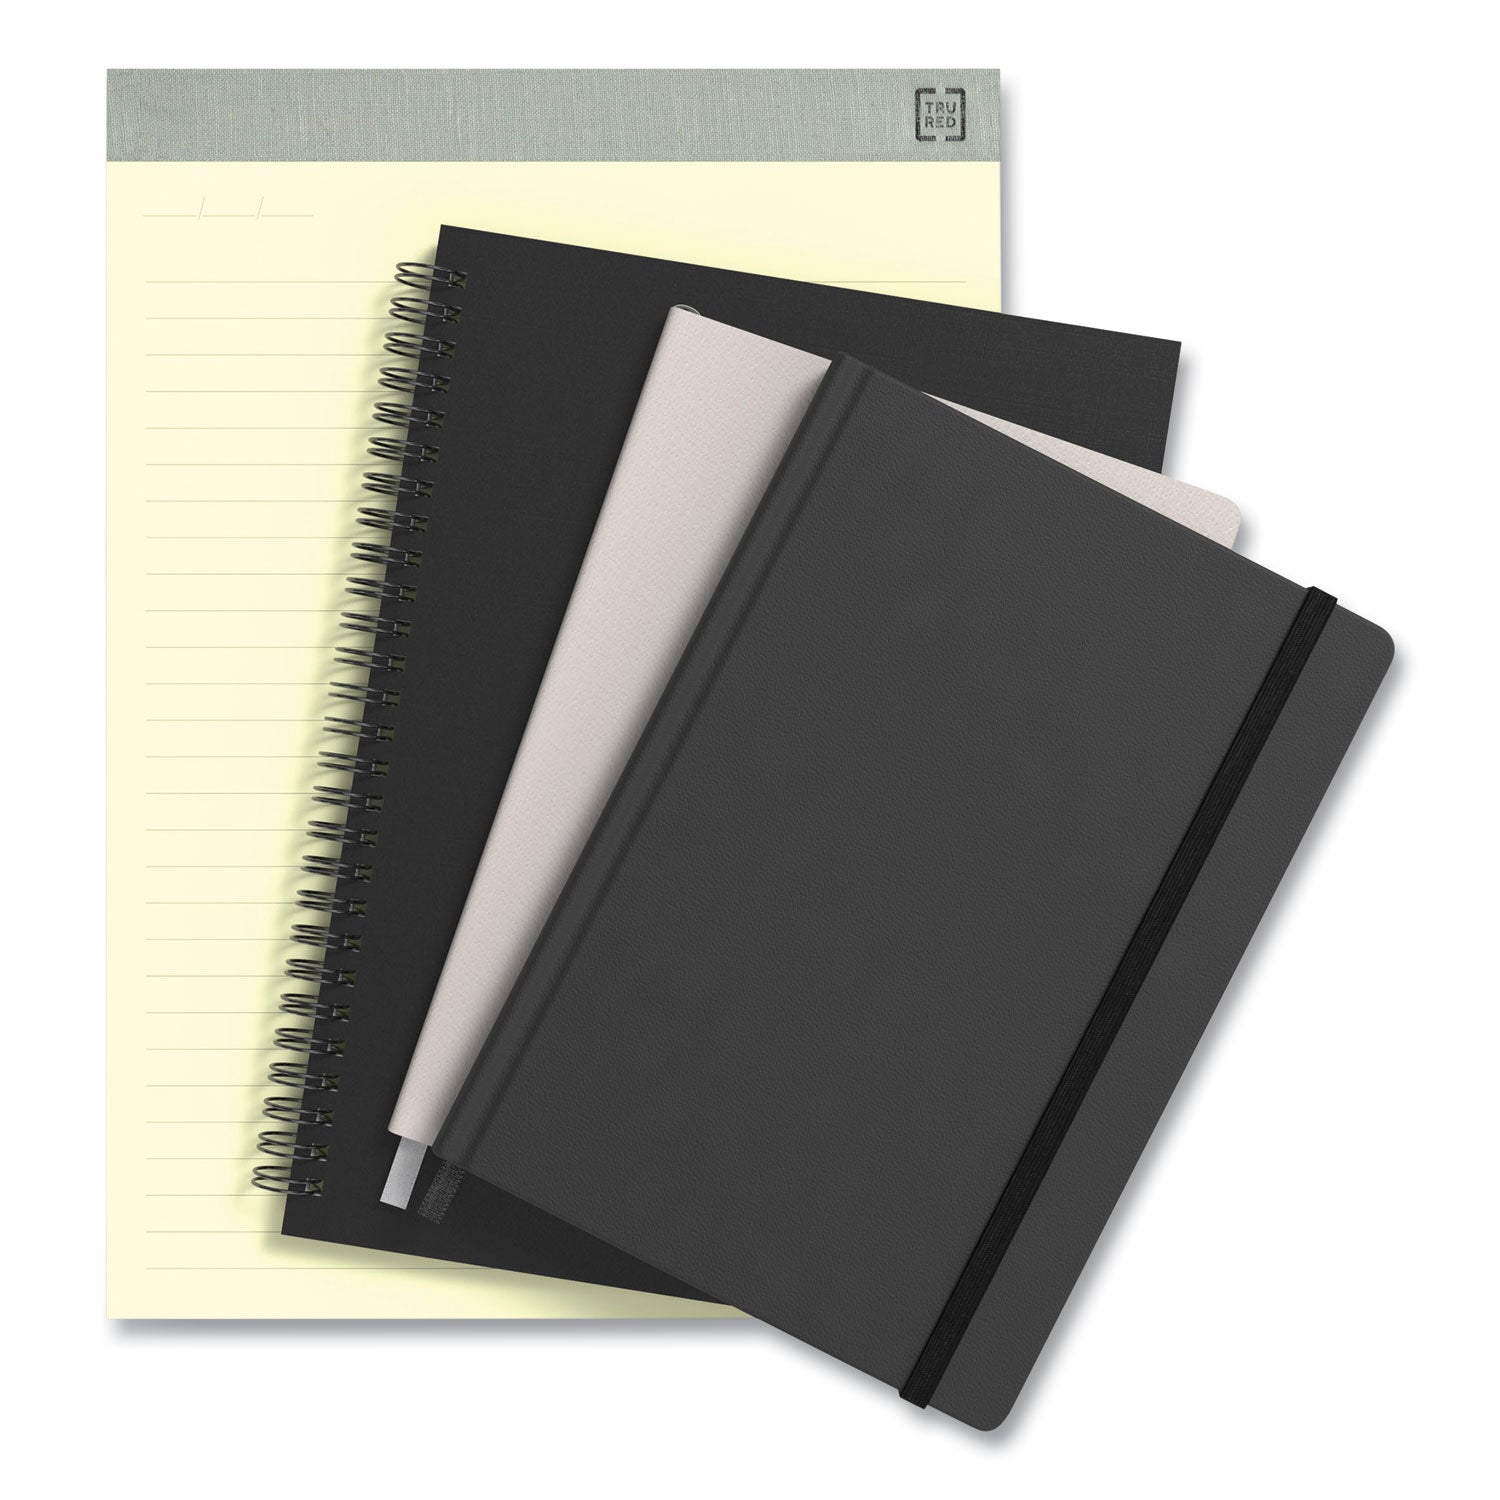 flexible-cover-business-journal-elastic-closure-1-subject-dotted-rule-black-cover-128-8-x-55-sheets_tud24377283 - 6